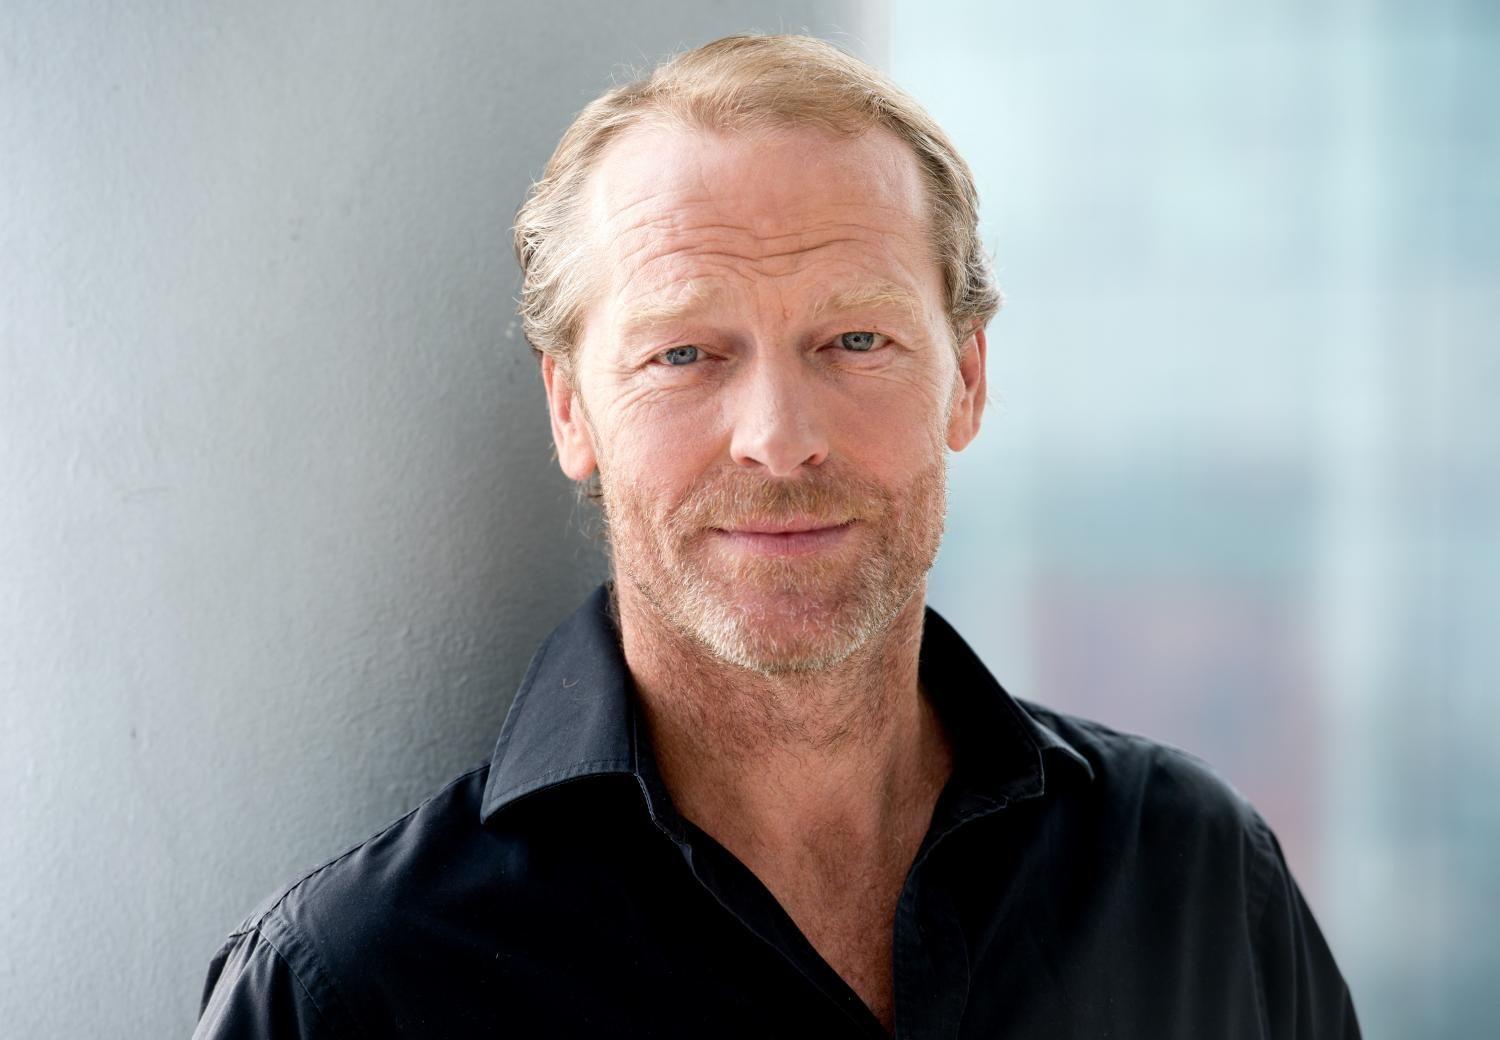 Iain Glen All Upcoming Movies List 2017 With Release Dates